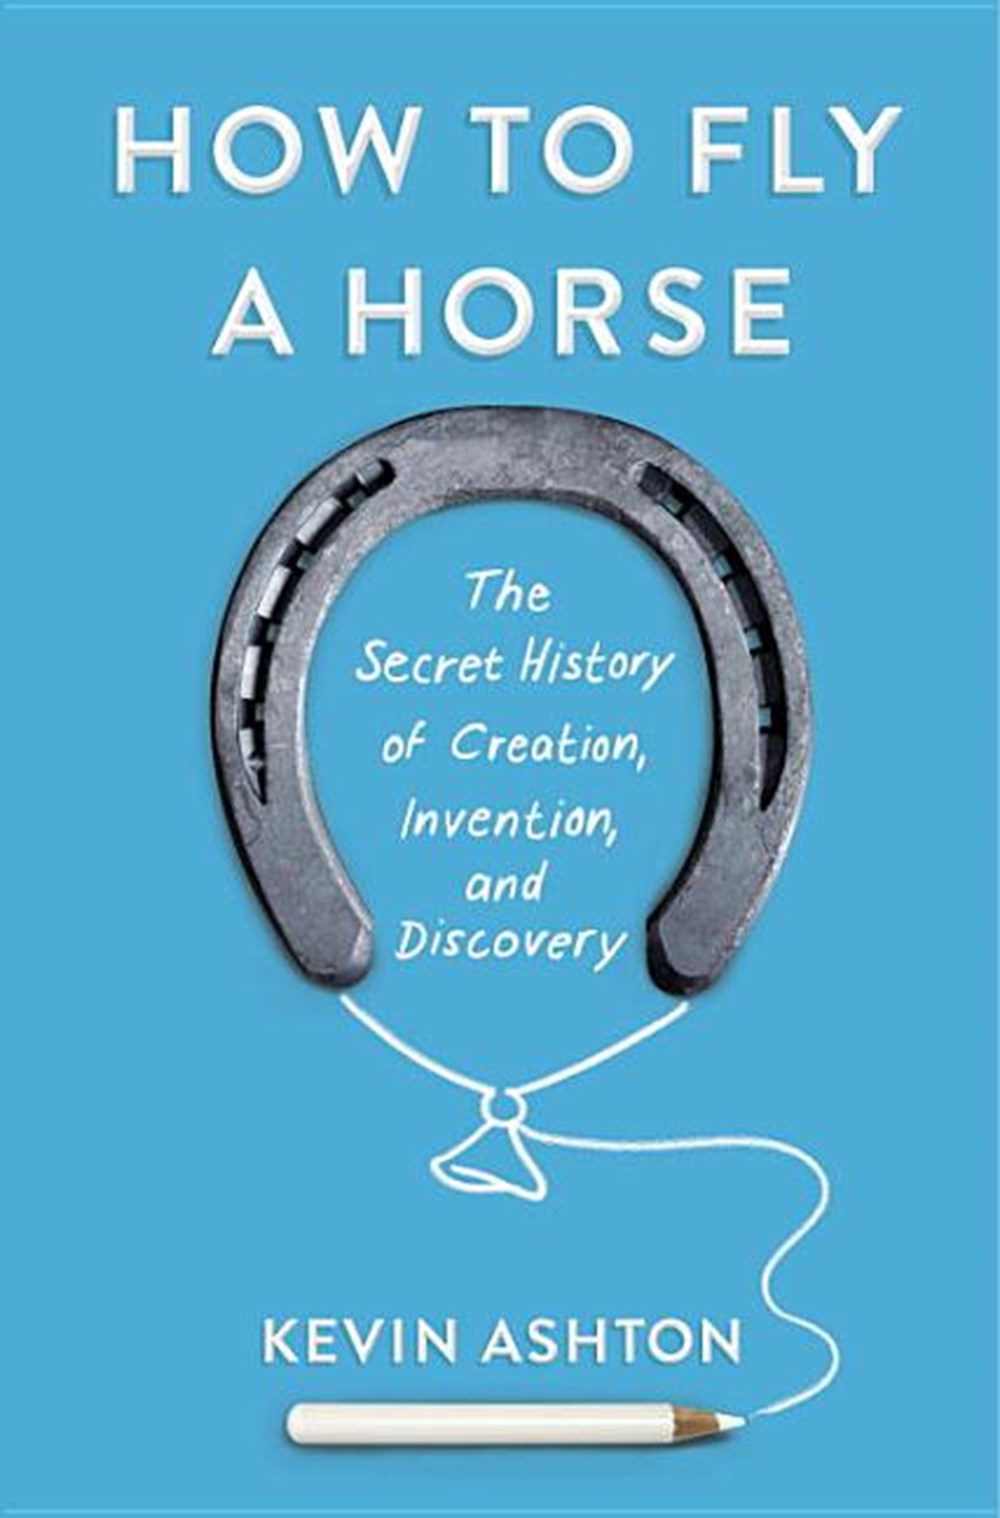 How to Fly a Horse The Secret History of Creation, Invention, and Discovery